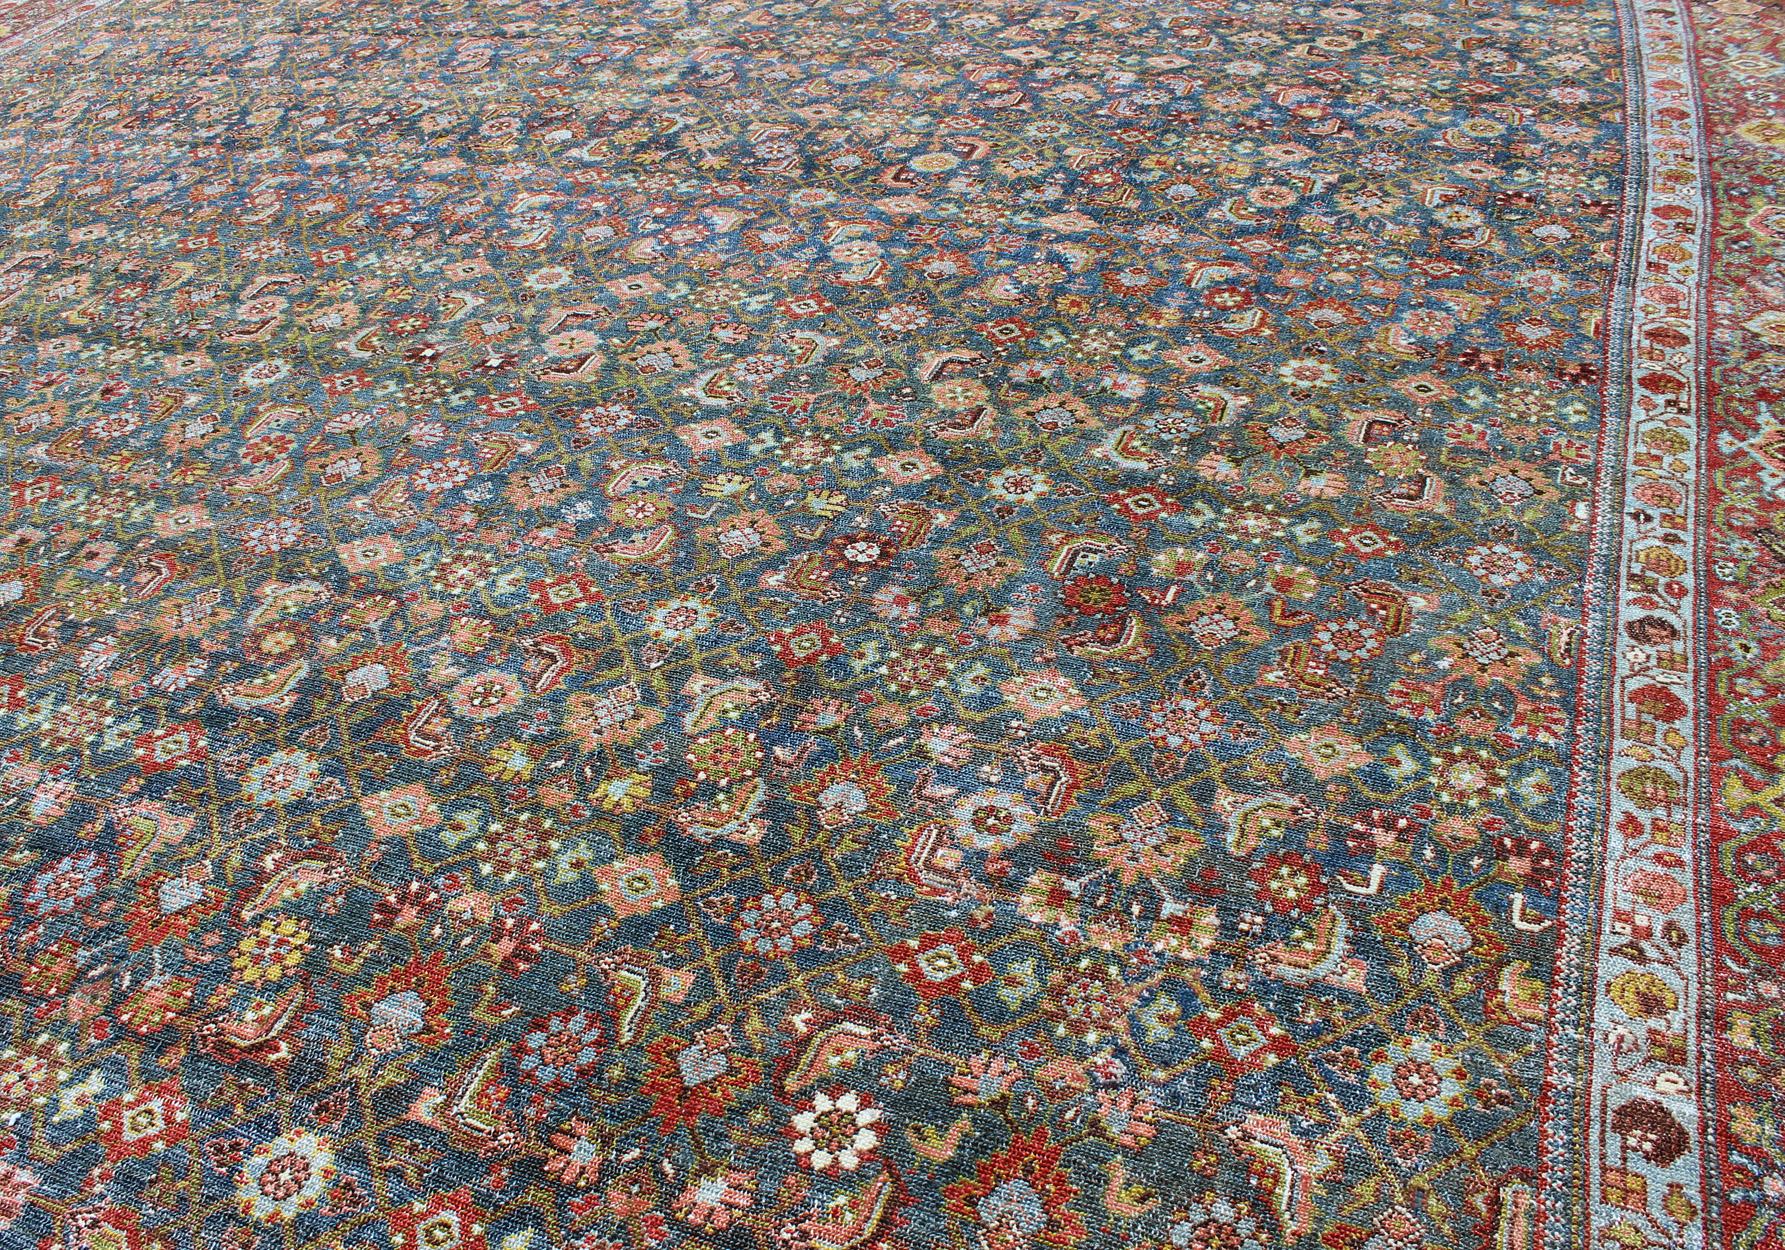 Colorful antique Malayer, rug GLD-7587, country of origin / type: Persian / Malayer, circa Early-20th Century.

Measures: 12'8'' x 19'7''.

This rug features a gorgeous all-over Herati design resplendent with exquisitely defined motifs. The